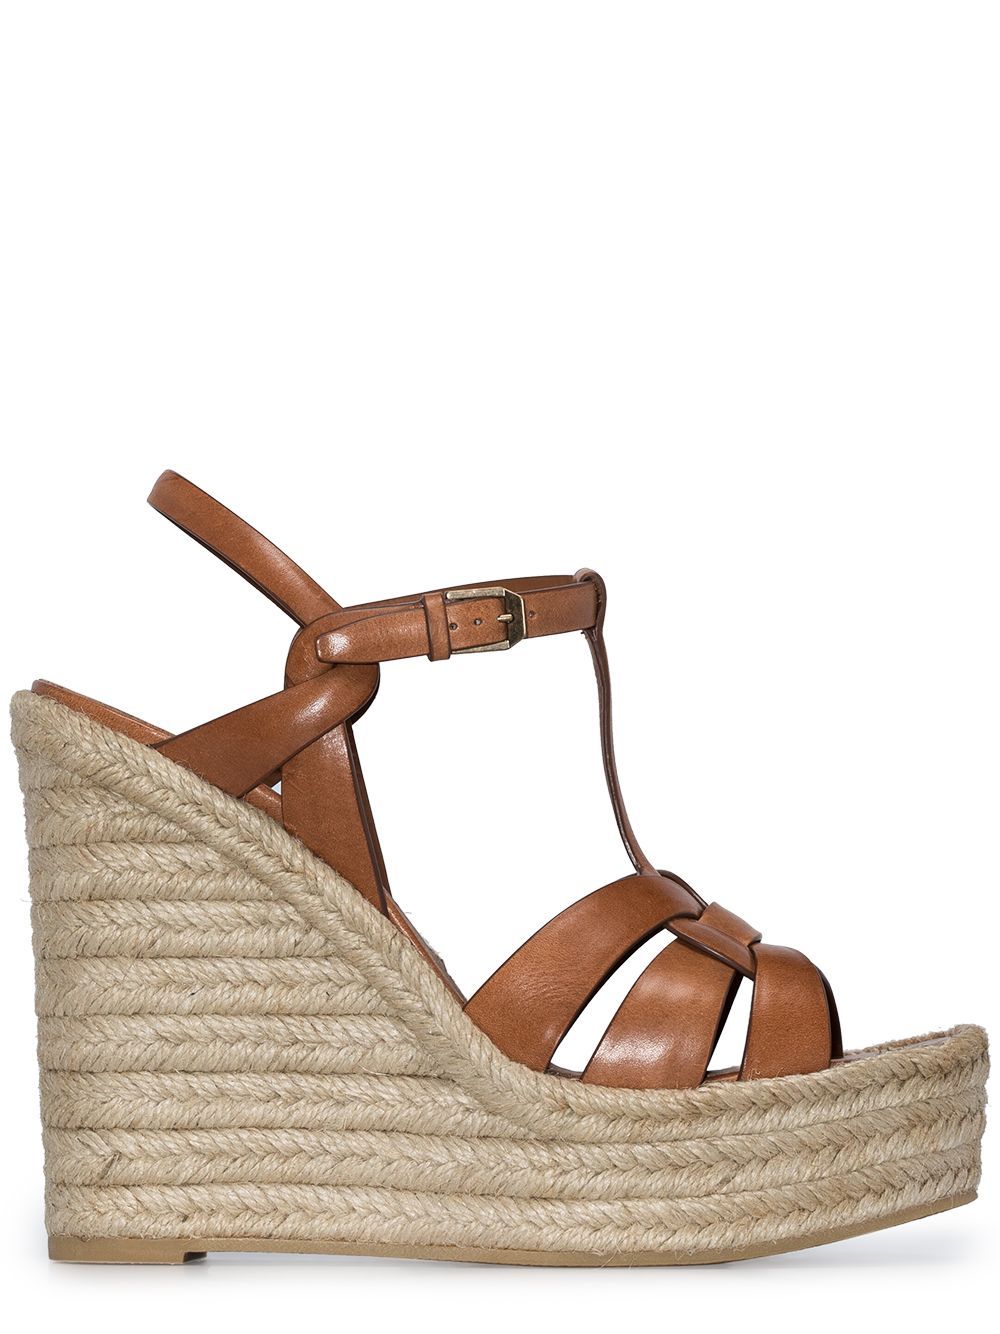 Saint Laurent Intertwining Strap Sandals With Jute Wedge Sole In Brown